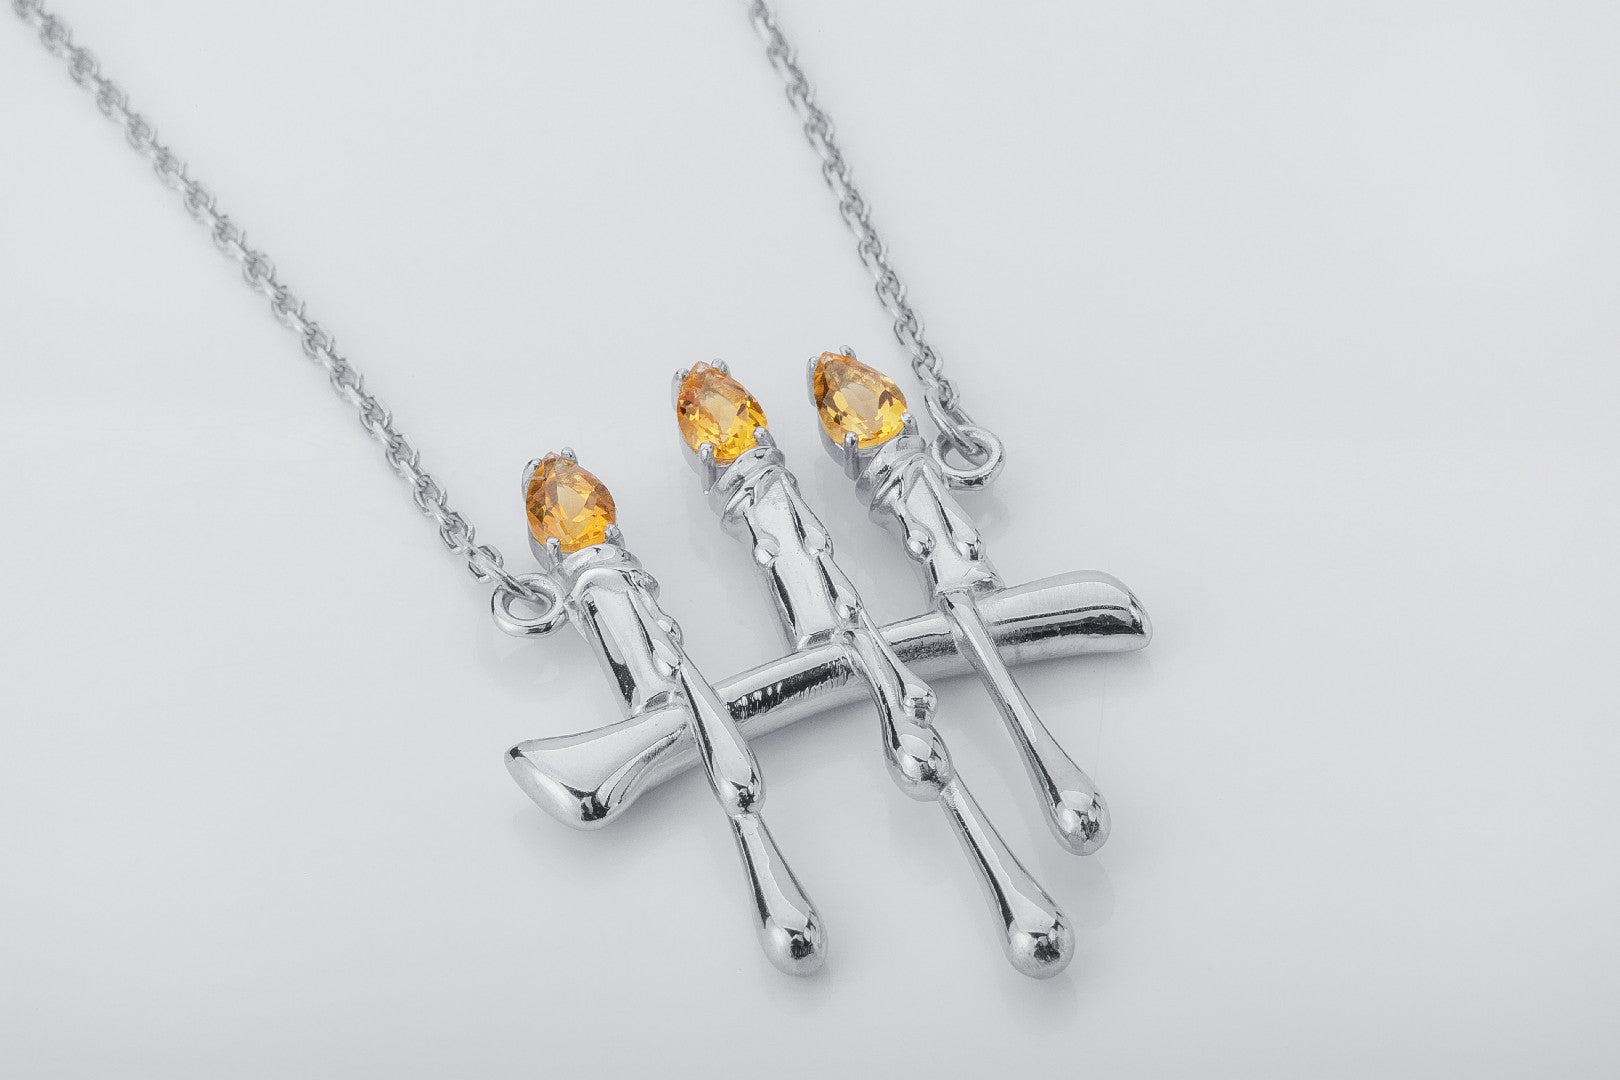 Molten Candles Pendant with Citrine Gems, Rhodium plated 925 Silver